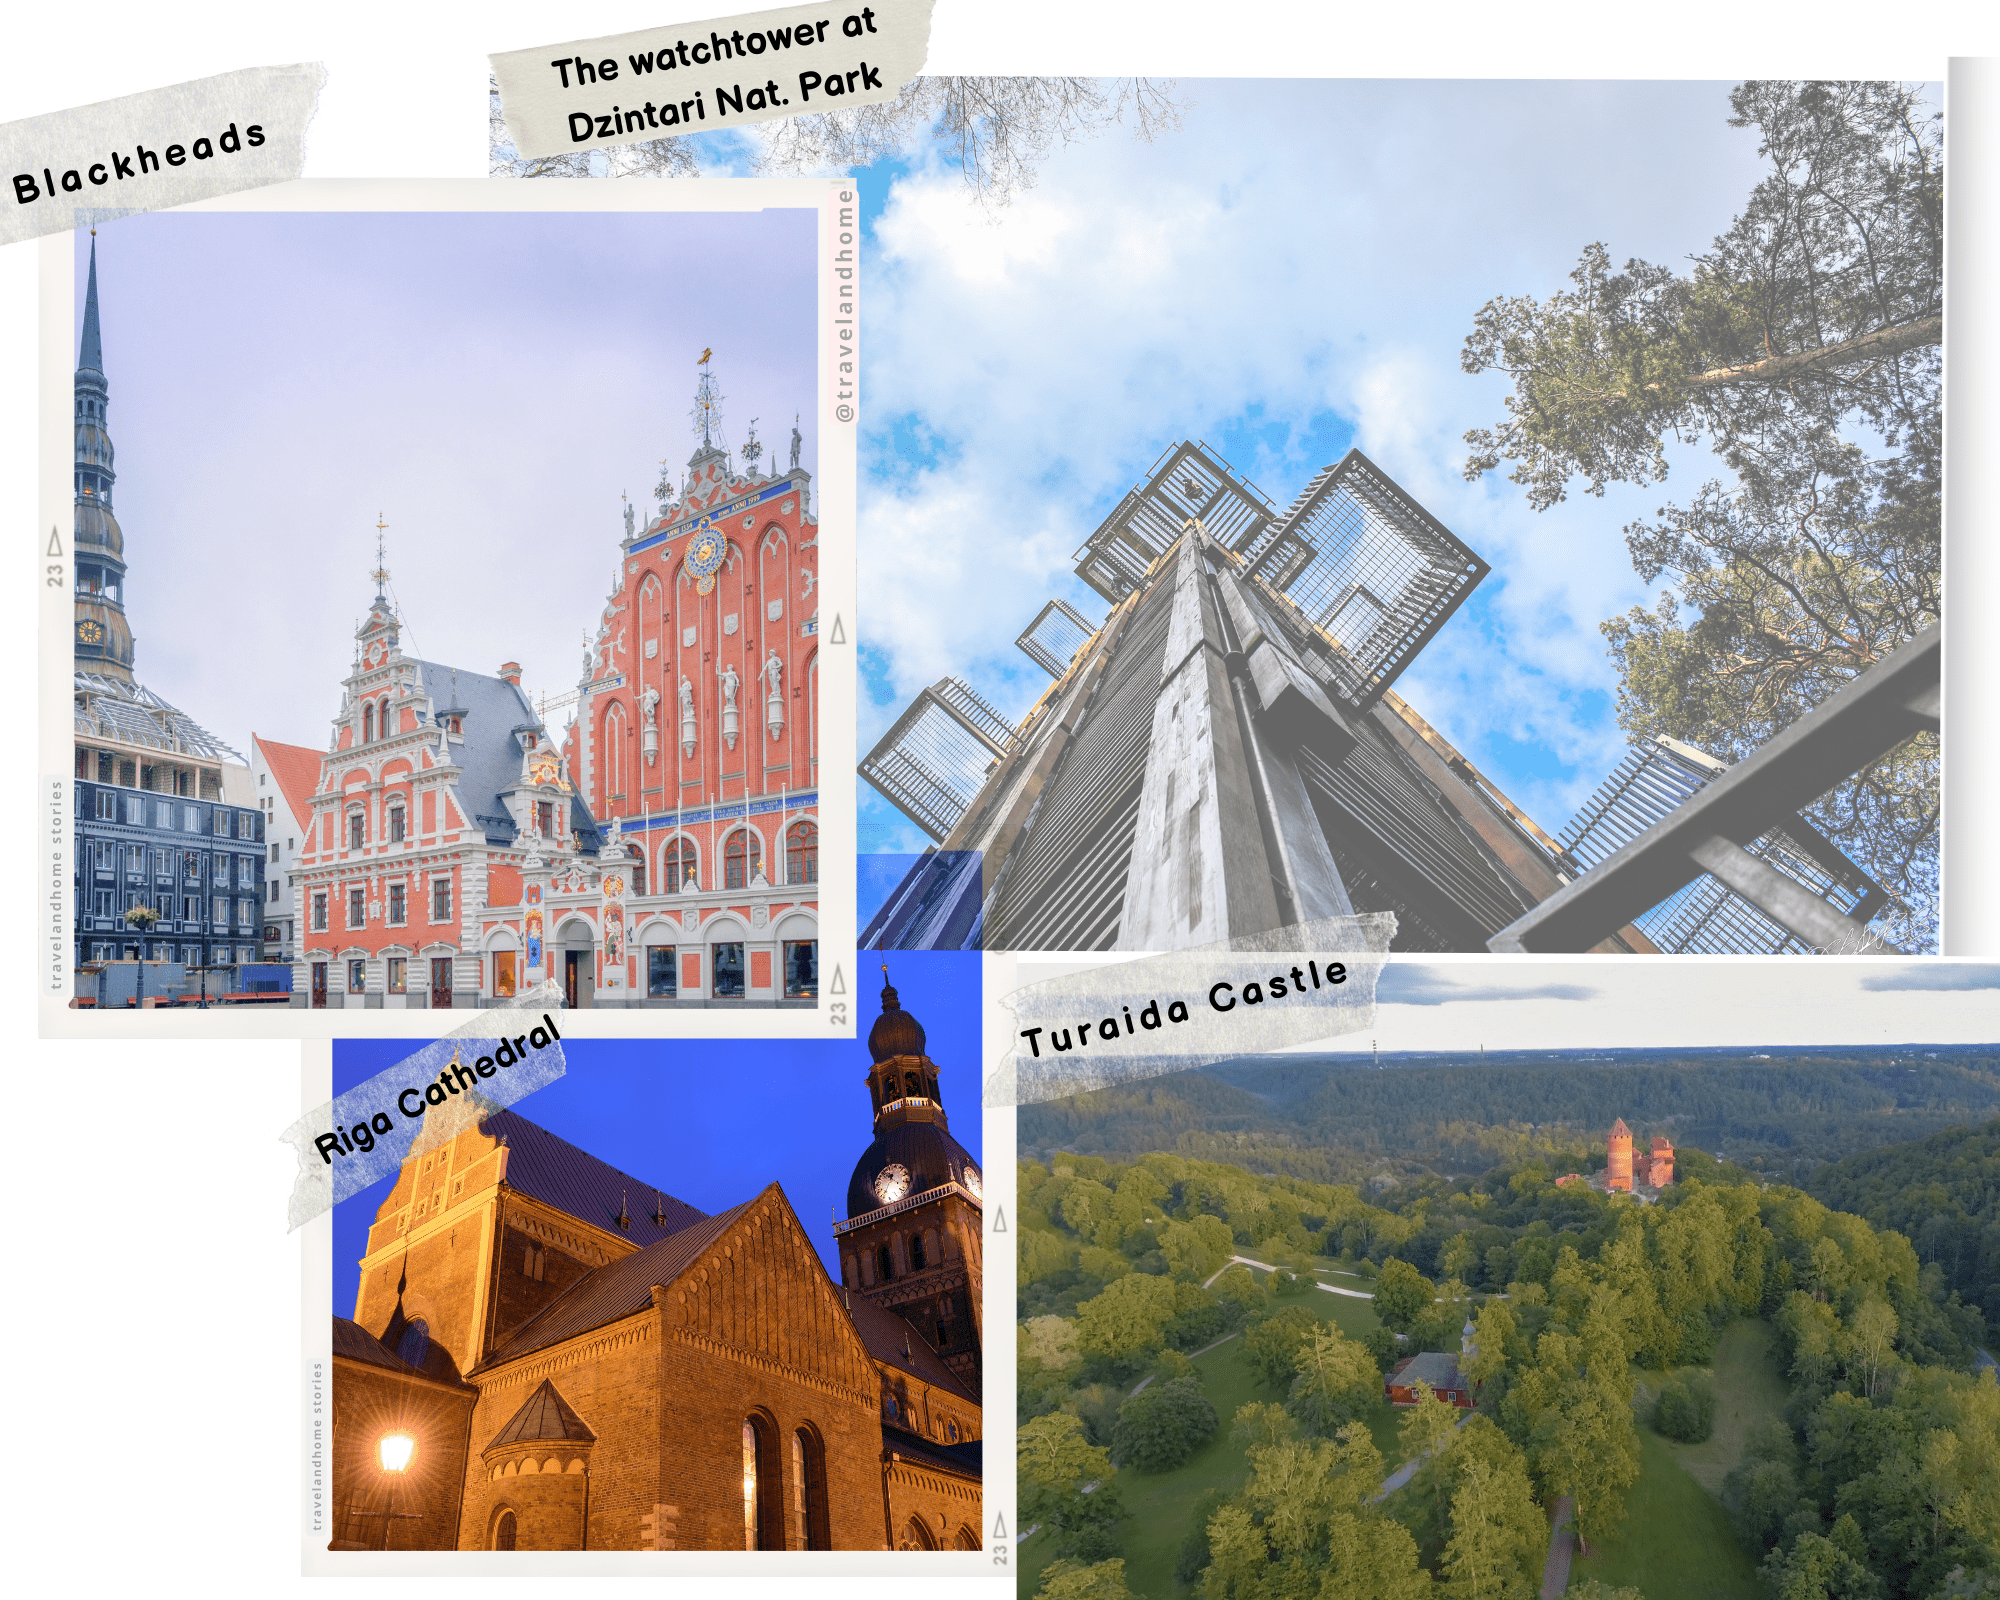 Visit Latvia best things to do and sightseeing in Riga cathedral turaida castle blackheads dzintari forest park min